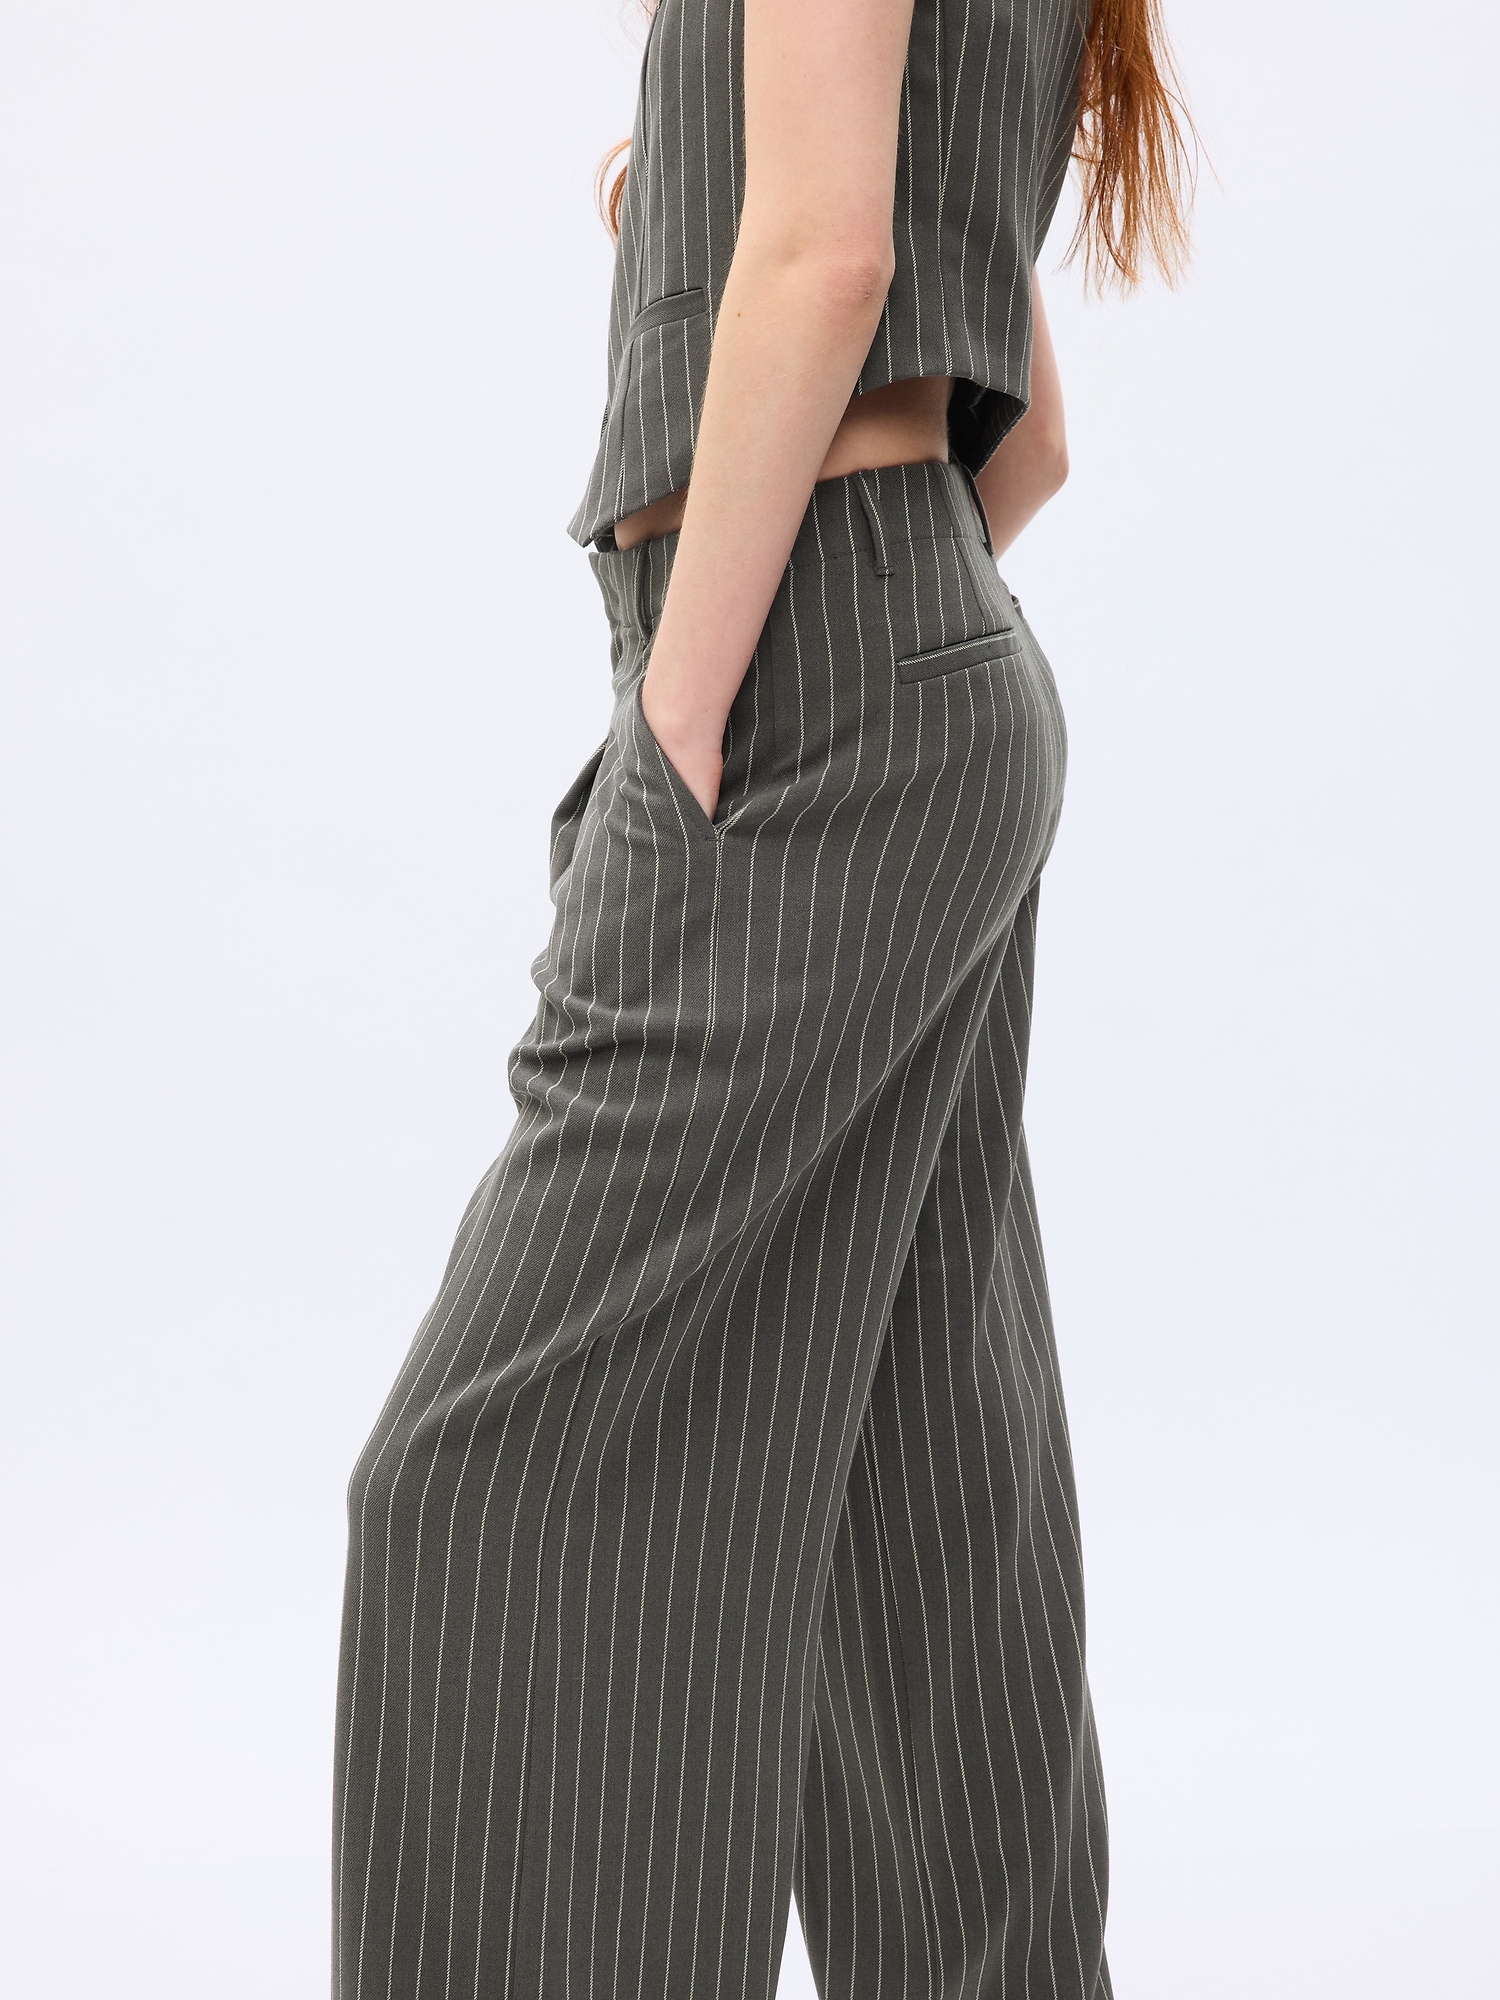 The Solid Color Pleated Pant - Women's High Rise Wide Leg Pleated